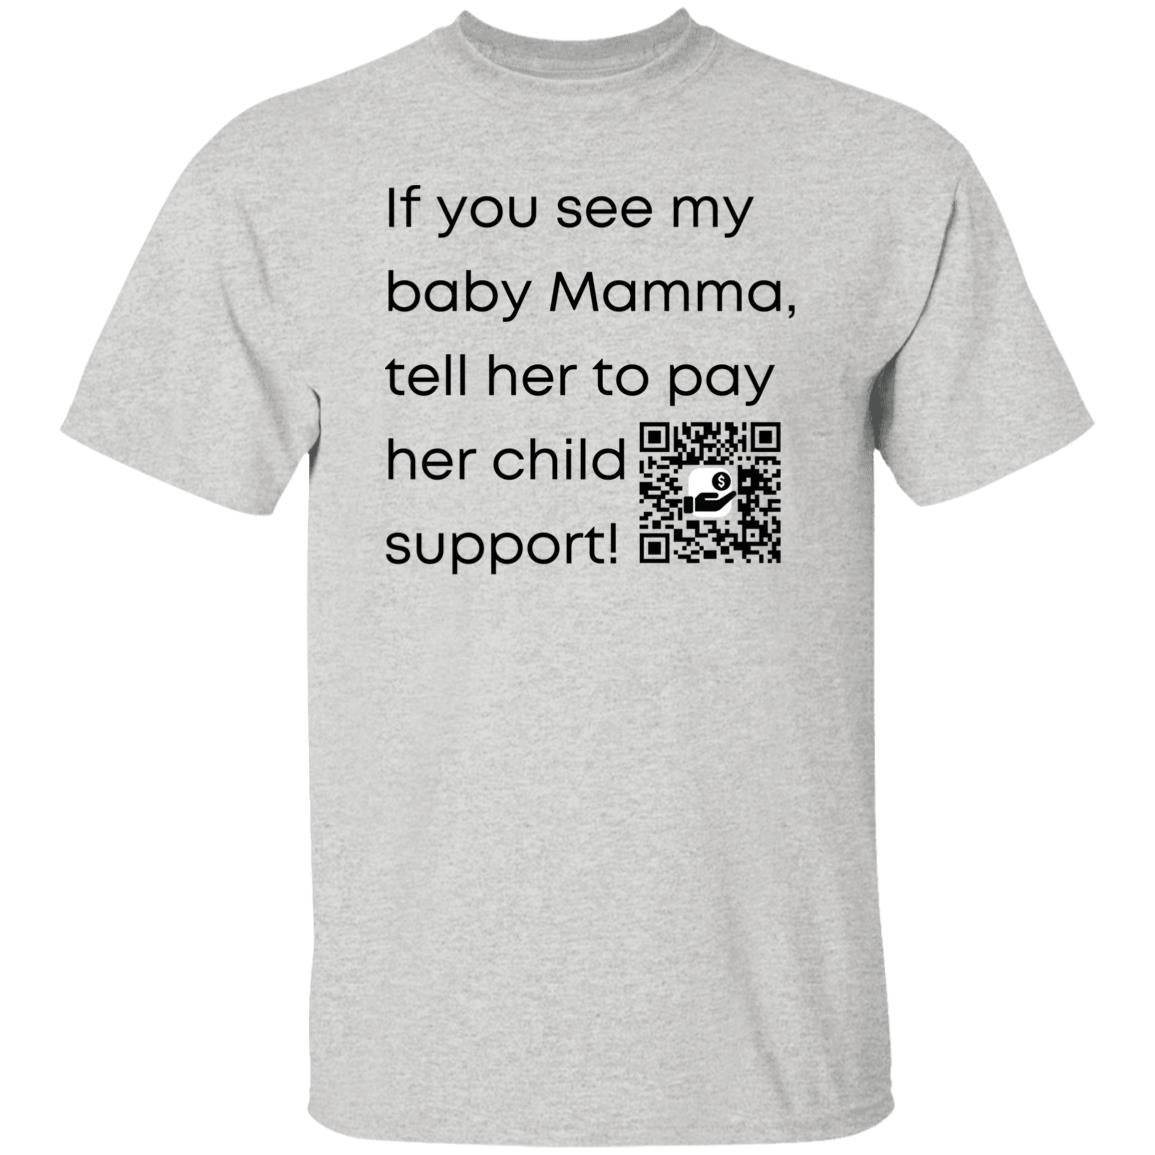 Pay Child Support (baby mamma) G500 5.3 oz. T-Shirt